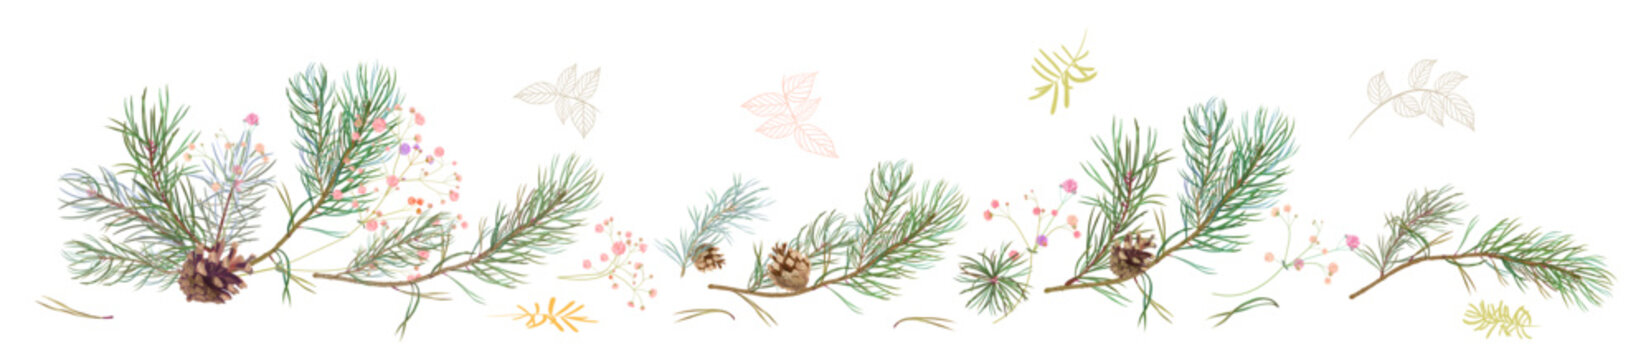 Horizontal panoramic border with pine branches, cones, needles, pink small flowers on white background. Realistic digital Christmas tree in watercolor style. Botanical illustration for design, vector